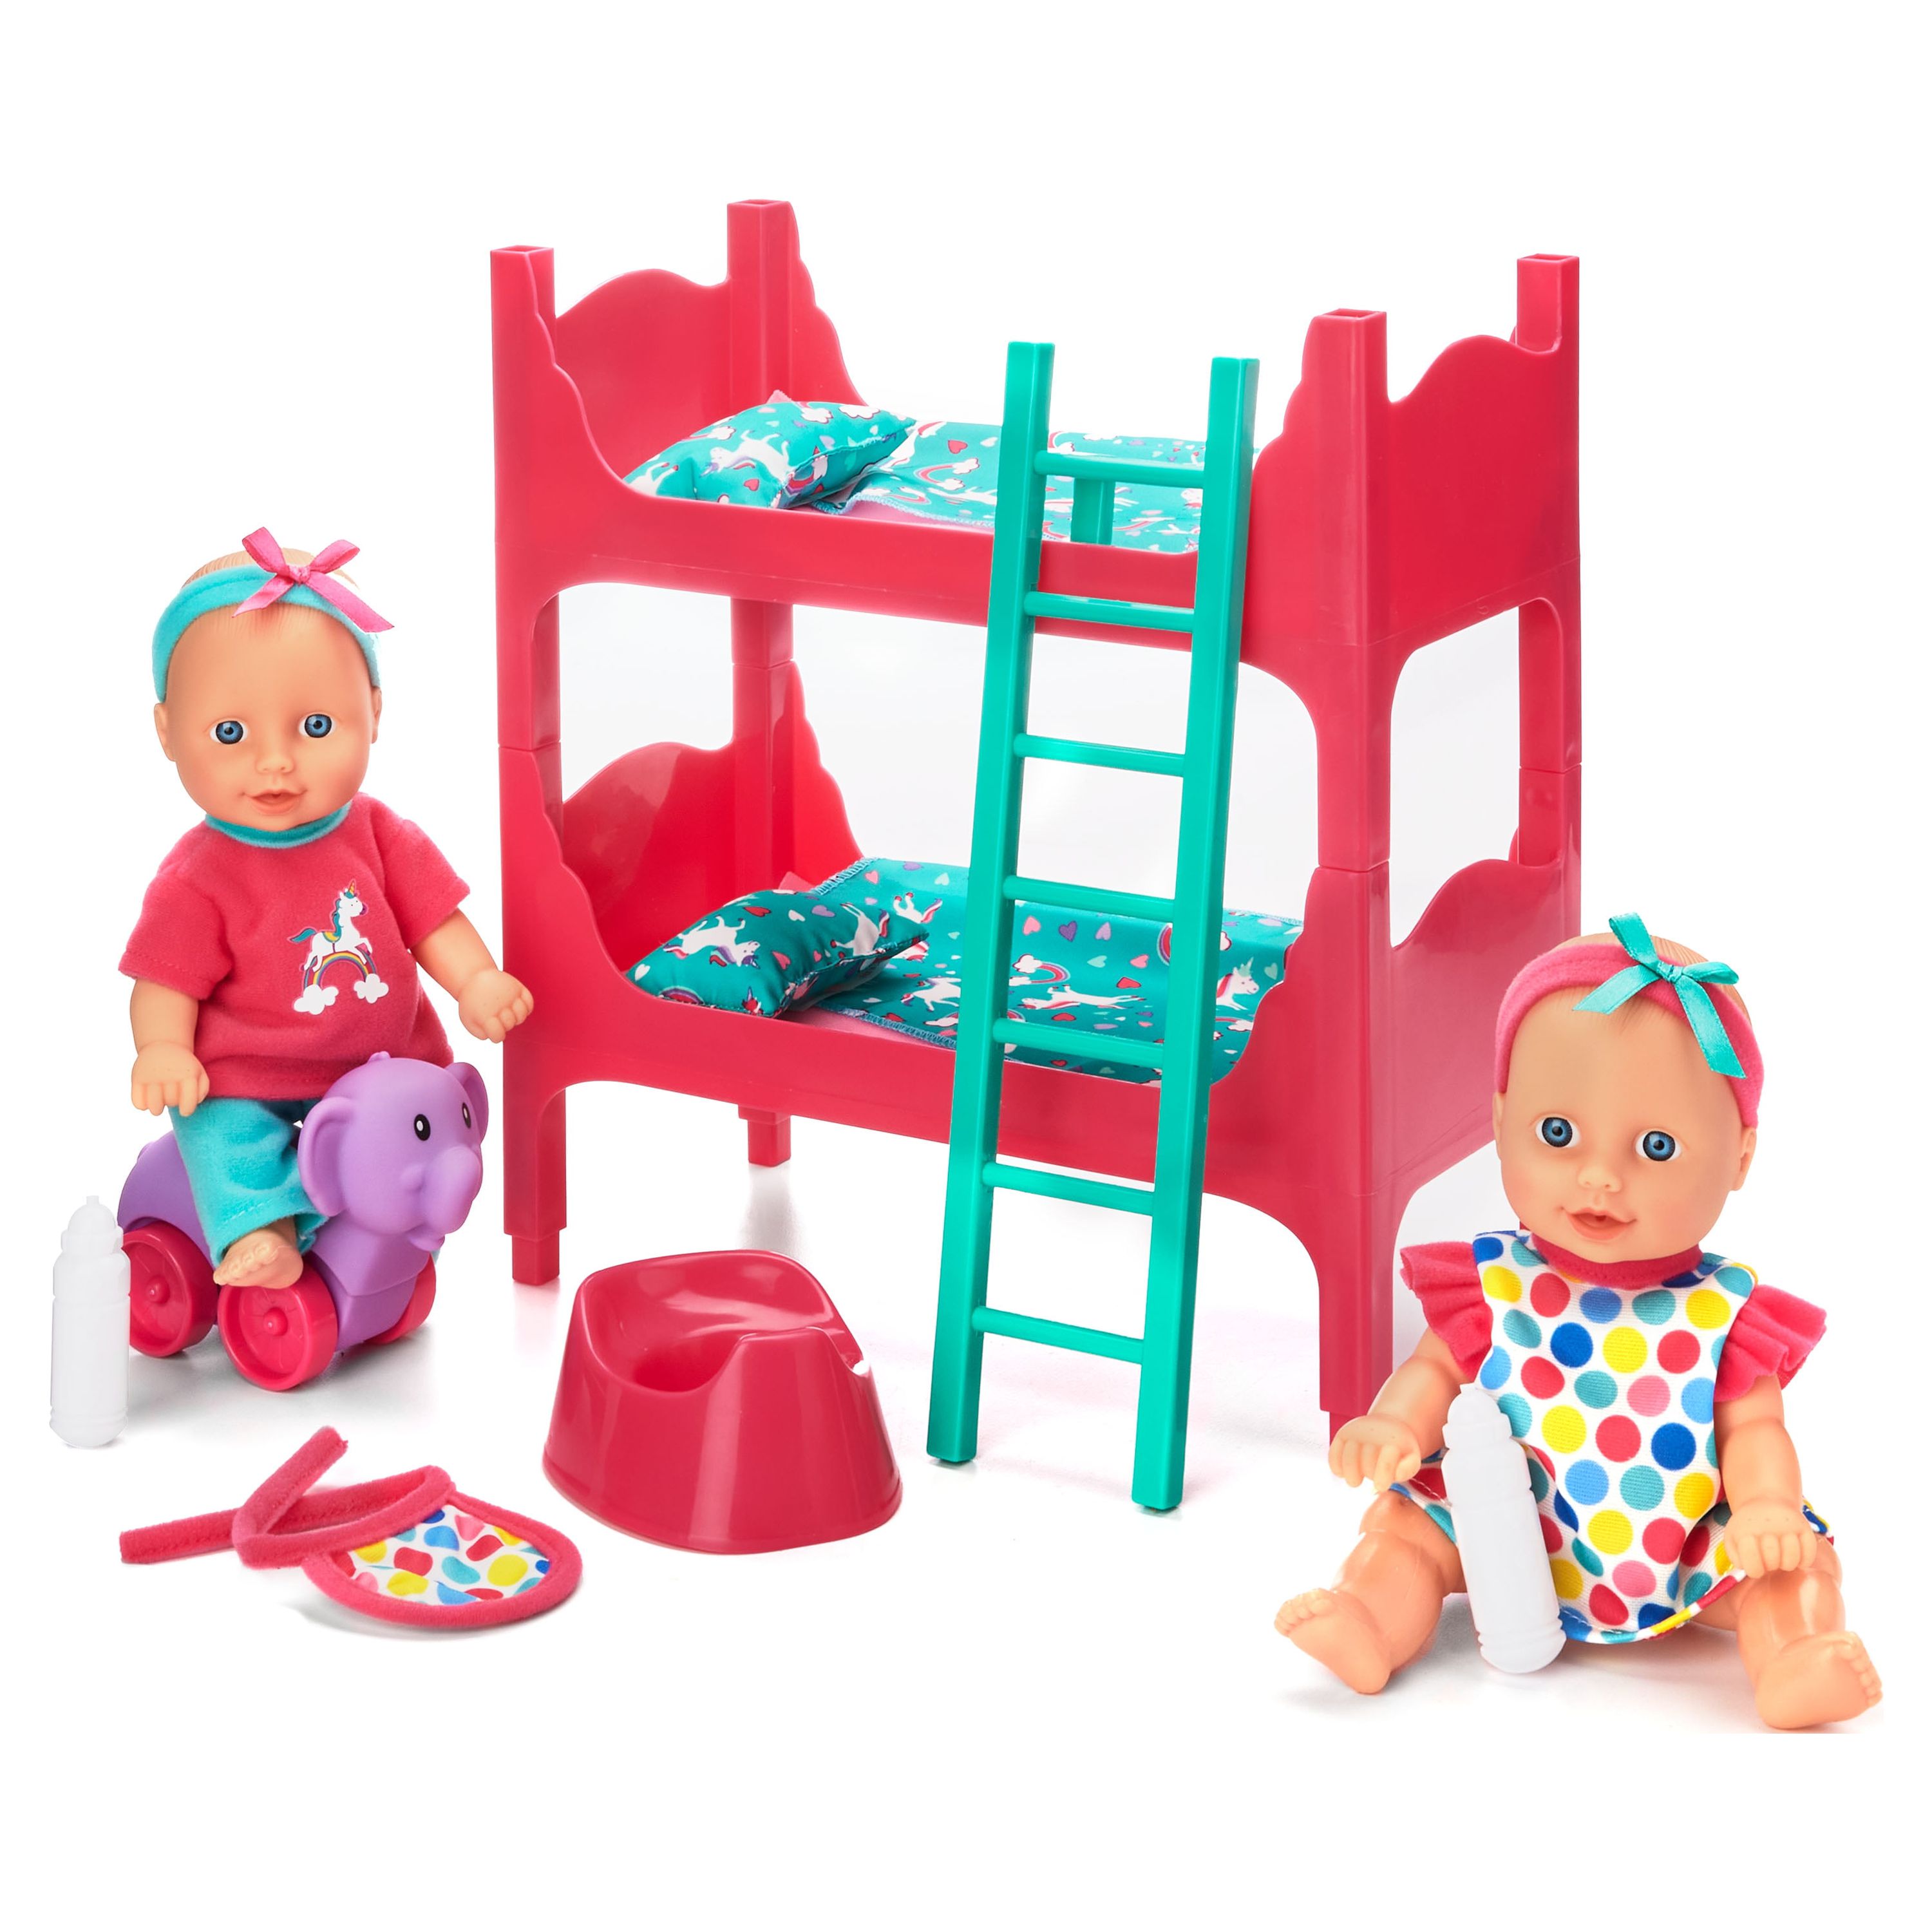 Kid Connection Baby Doll Room Play Set, Blue Eyes, Light Skin Tone - image 1 of 5